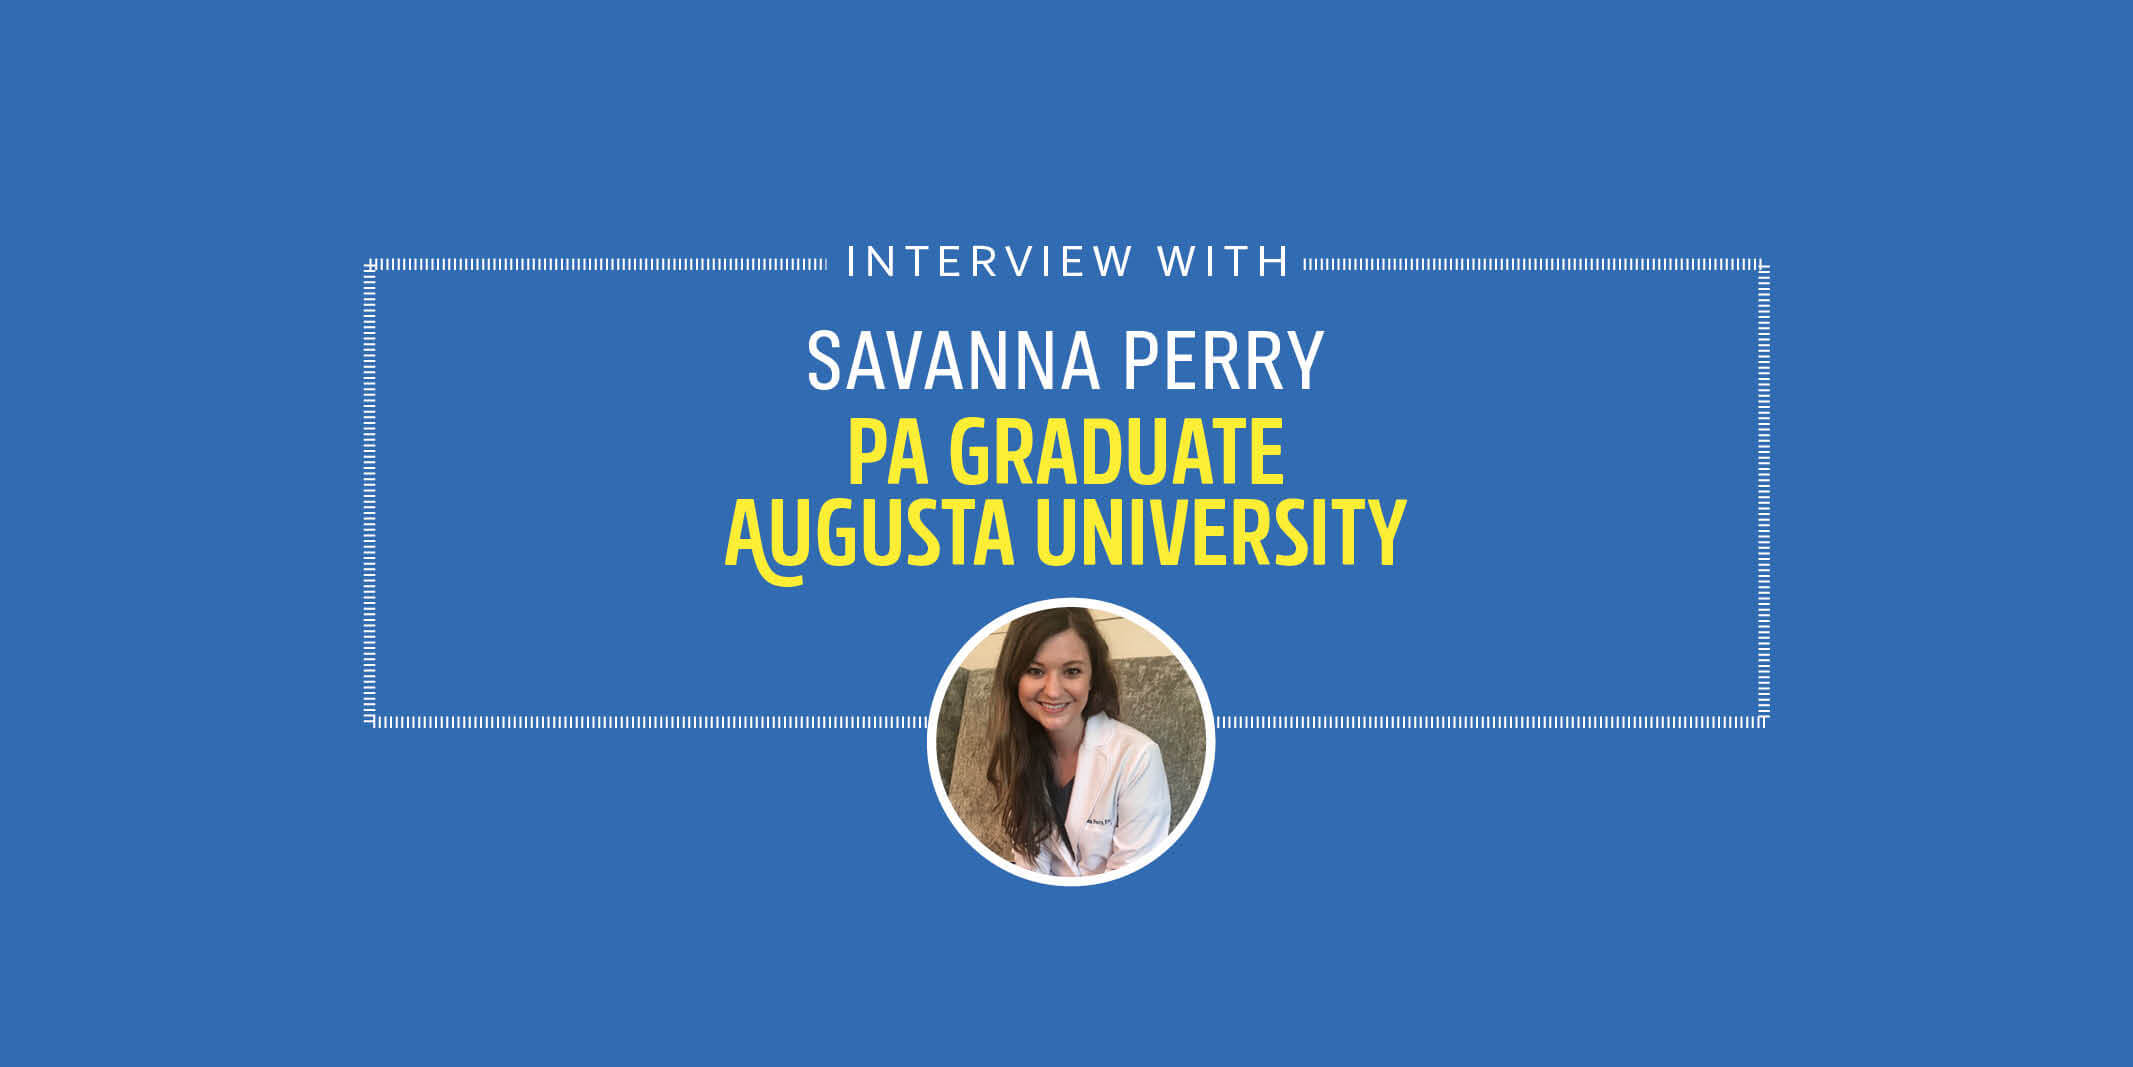 PA Student Interview with Savanna Perry - Graduate of Augusta University